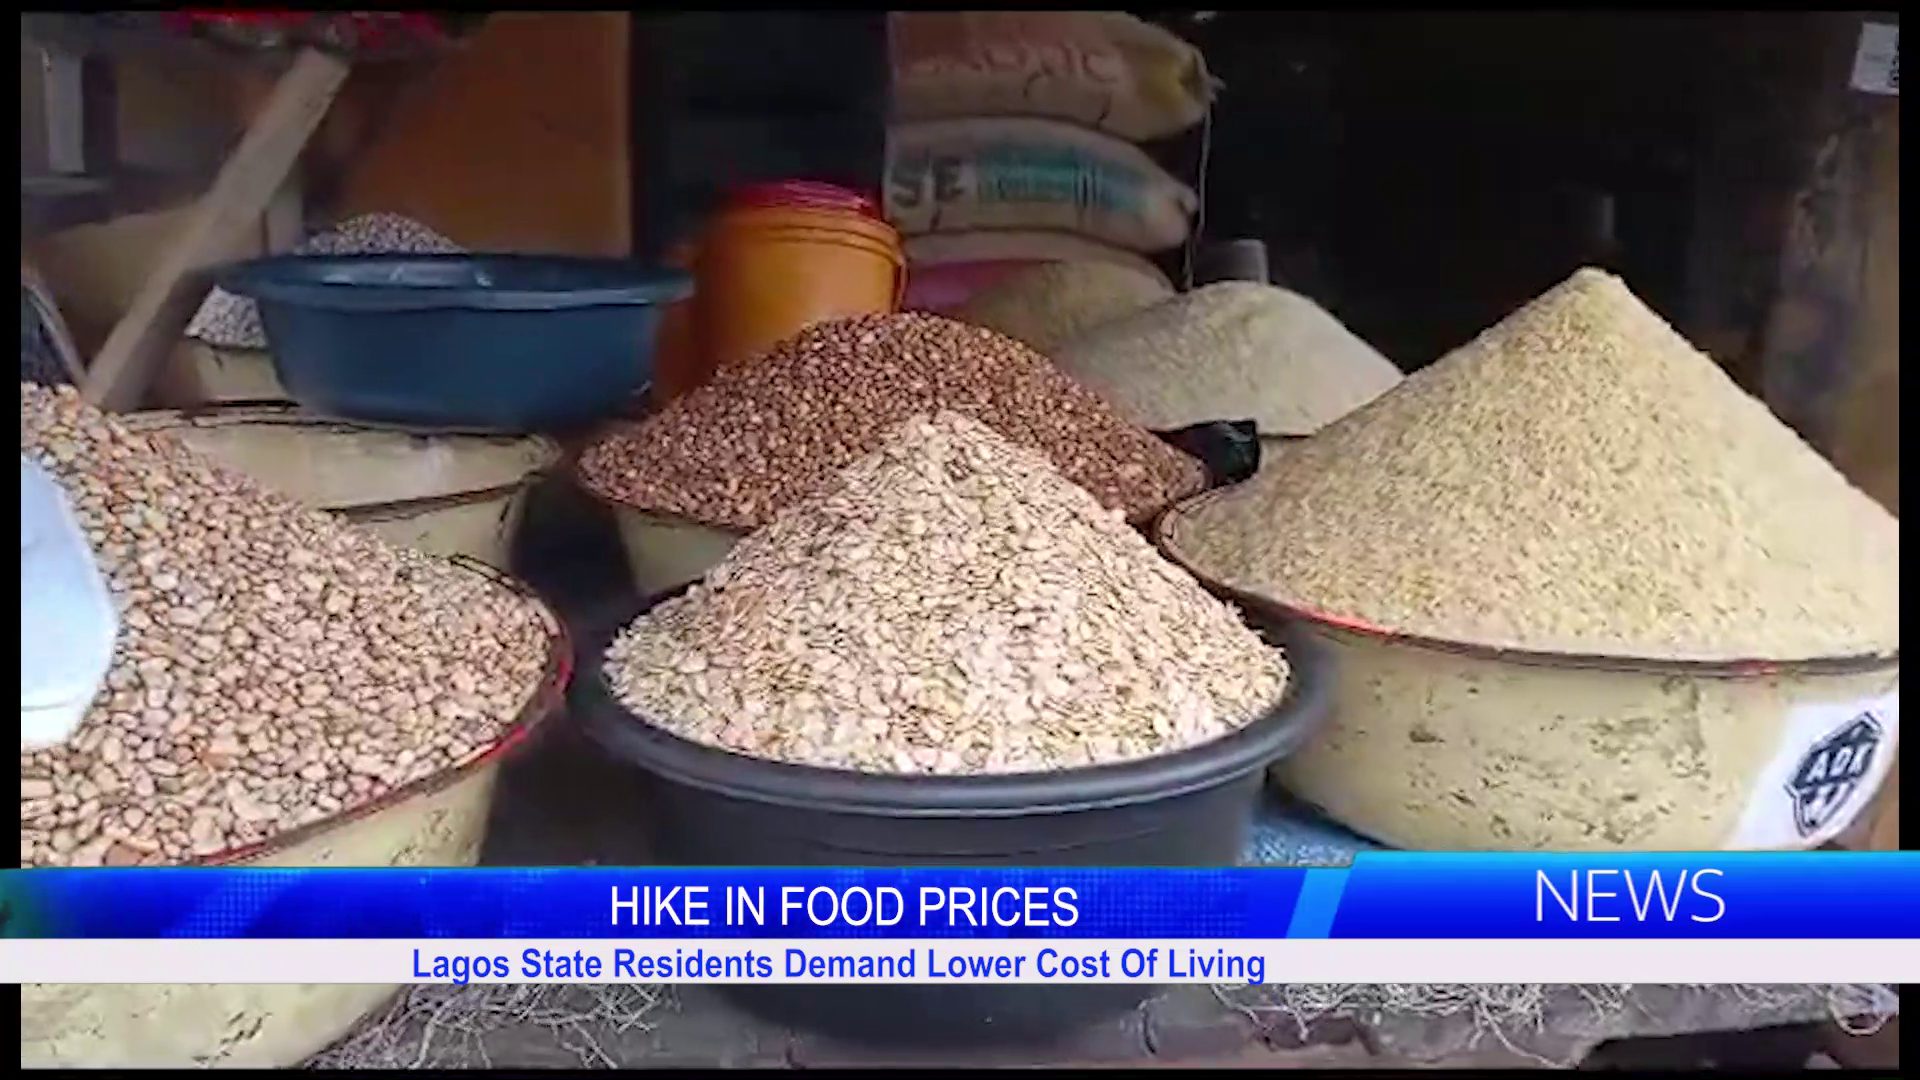 Hike In Food Prices: Lagos State Residents Demand Lower Cost Of Living